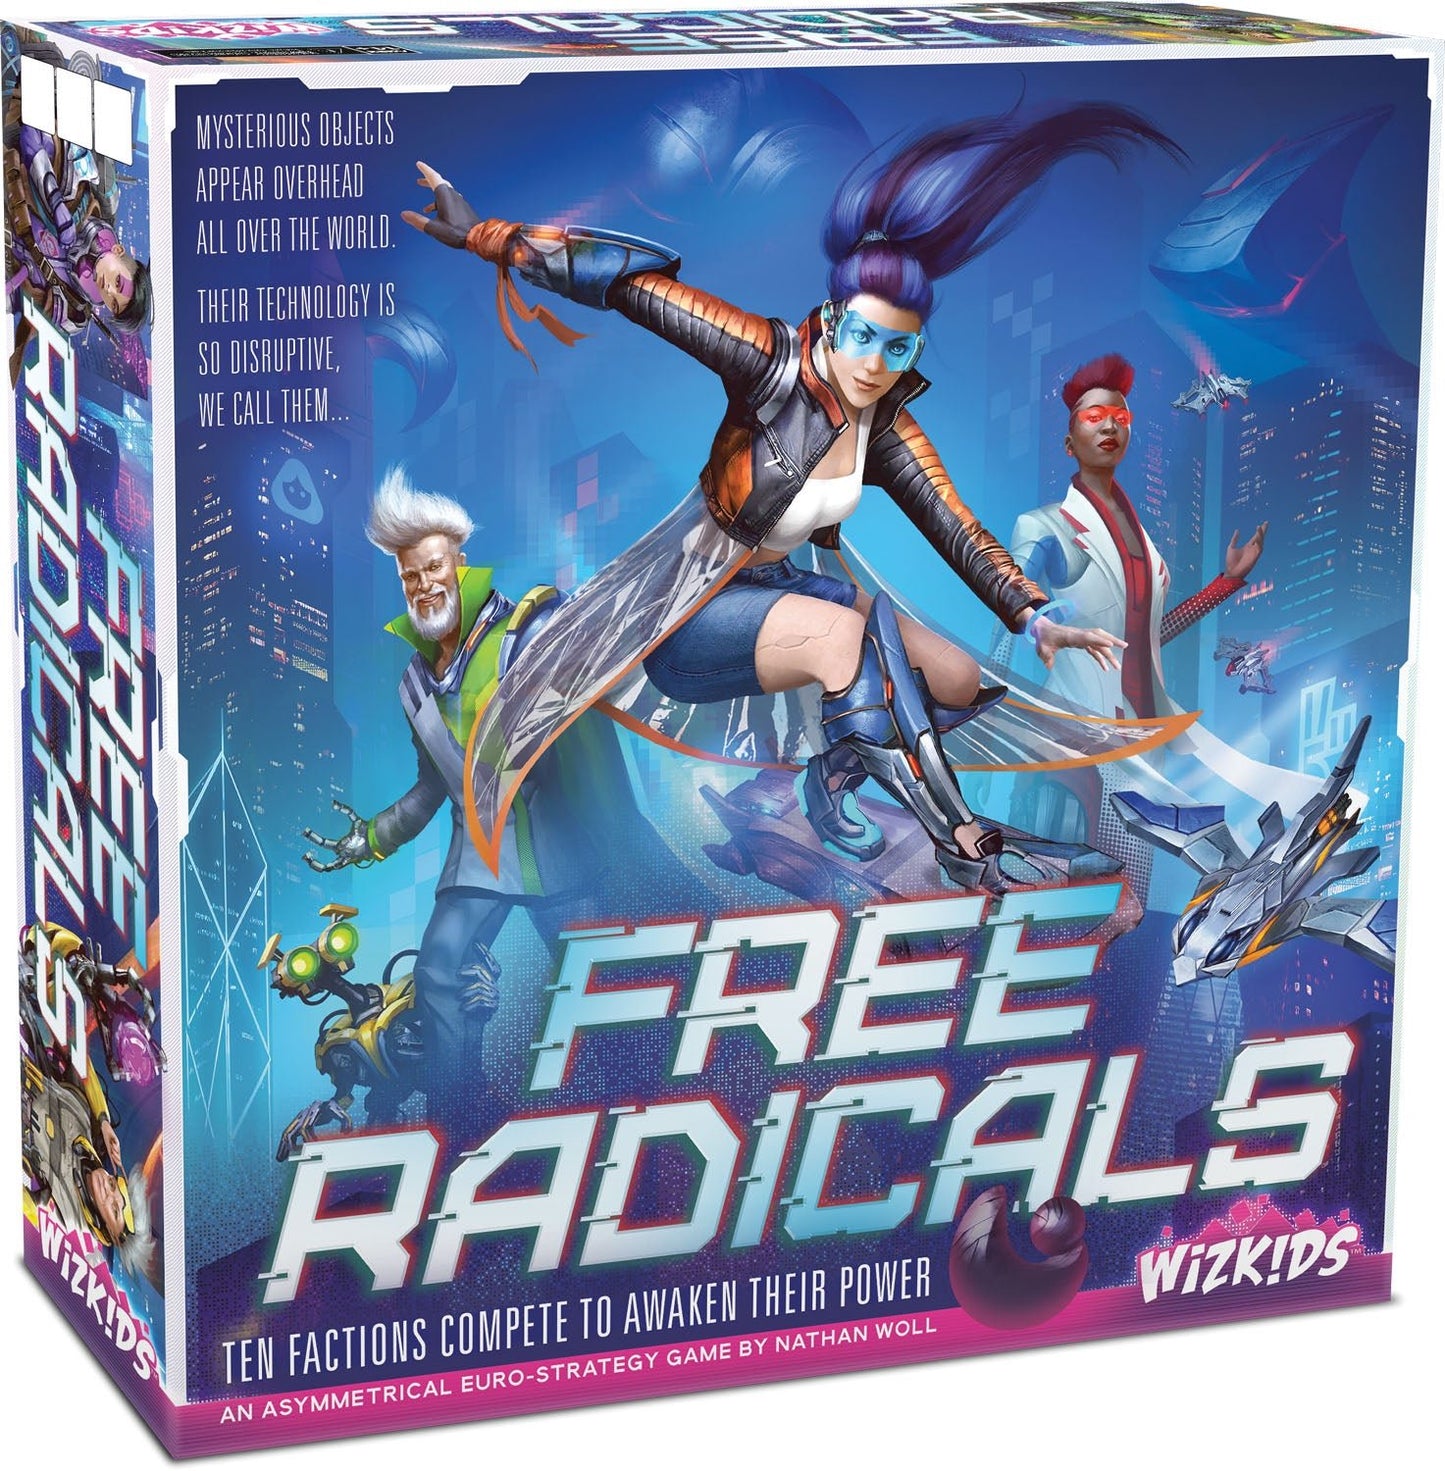 Free Radicals from NECA at The Compleat Strategist